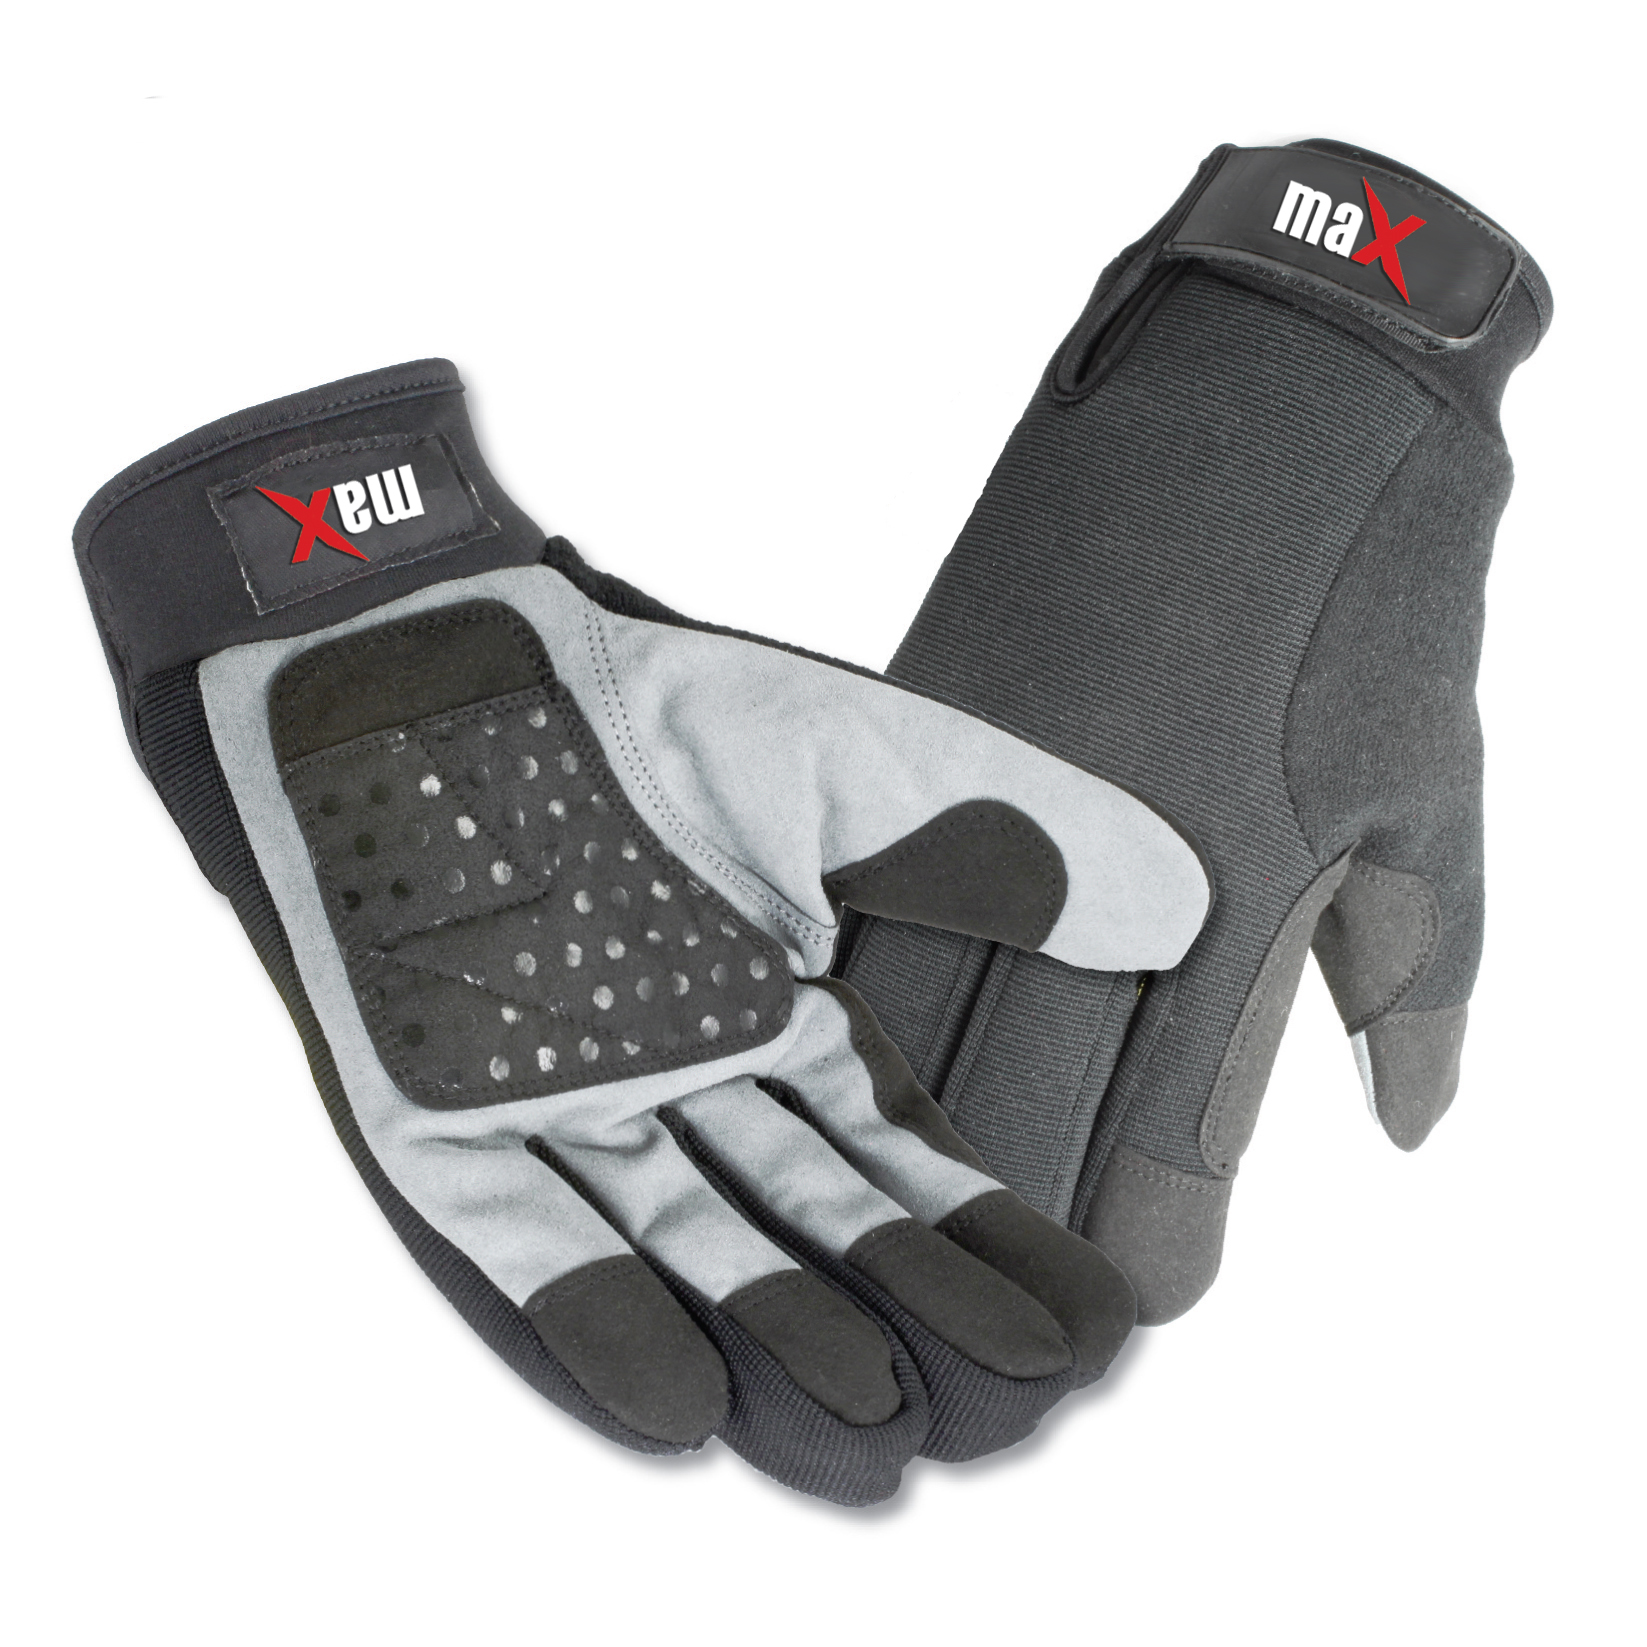 maX&trade; 5.0 Thermal Insulated Sport Utility Gloves